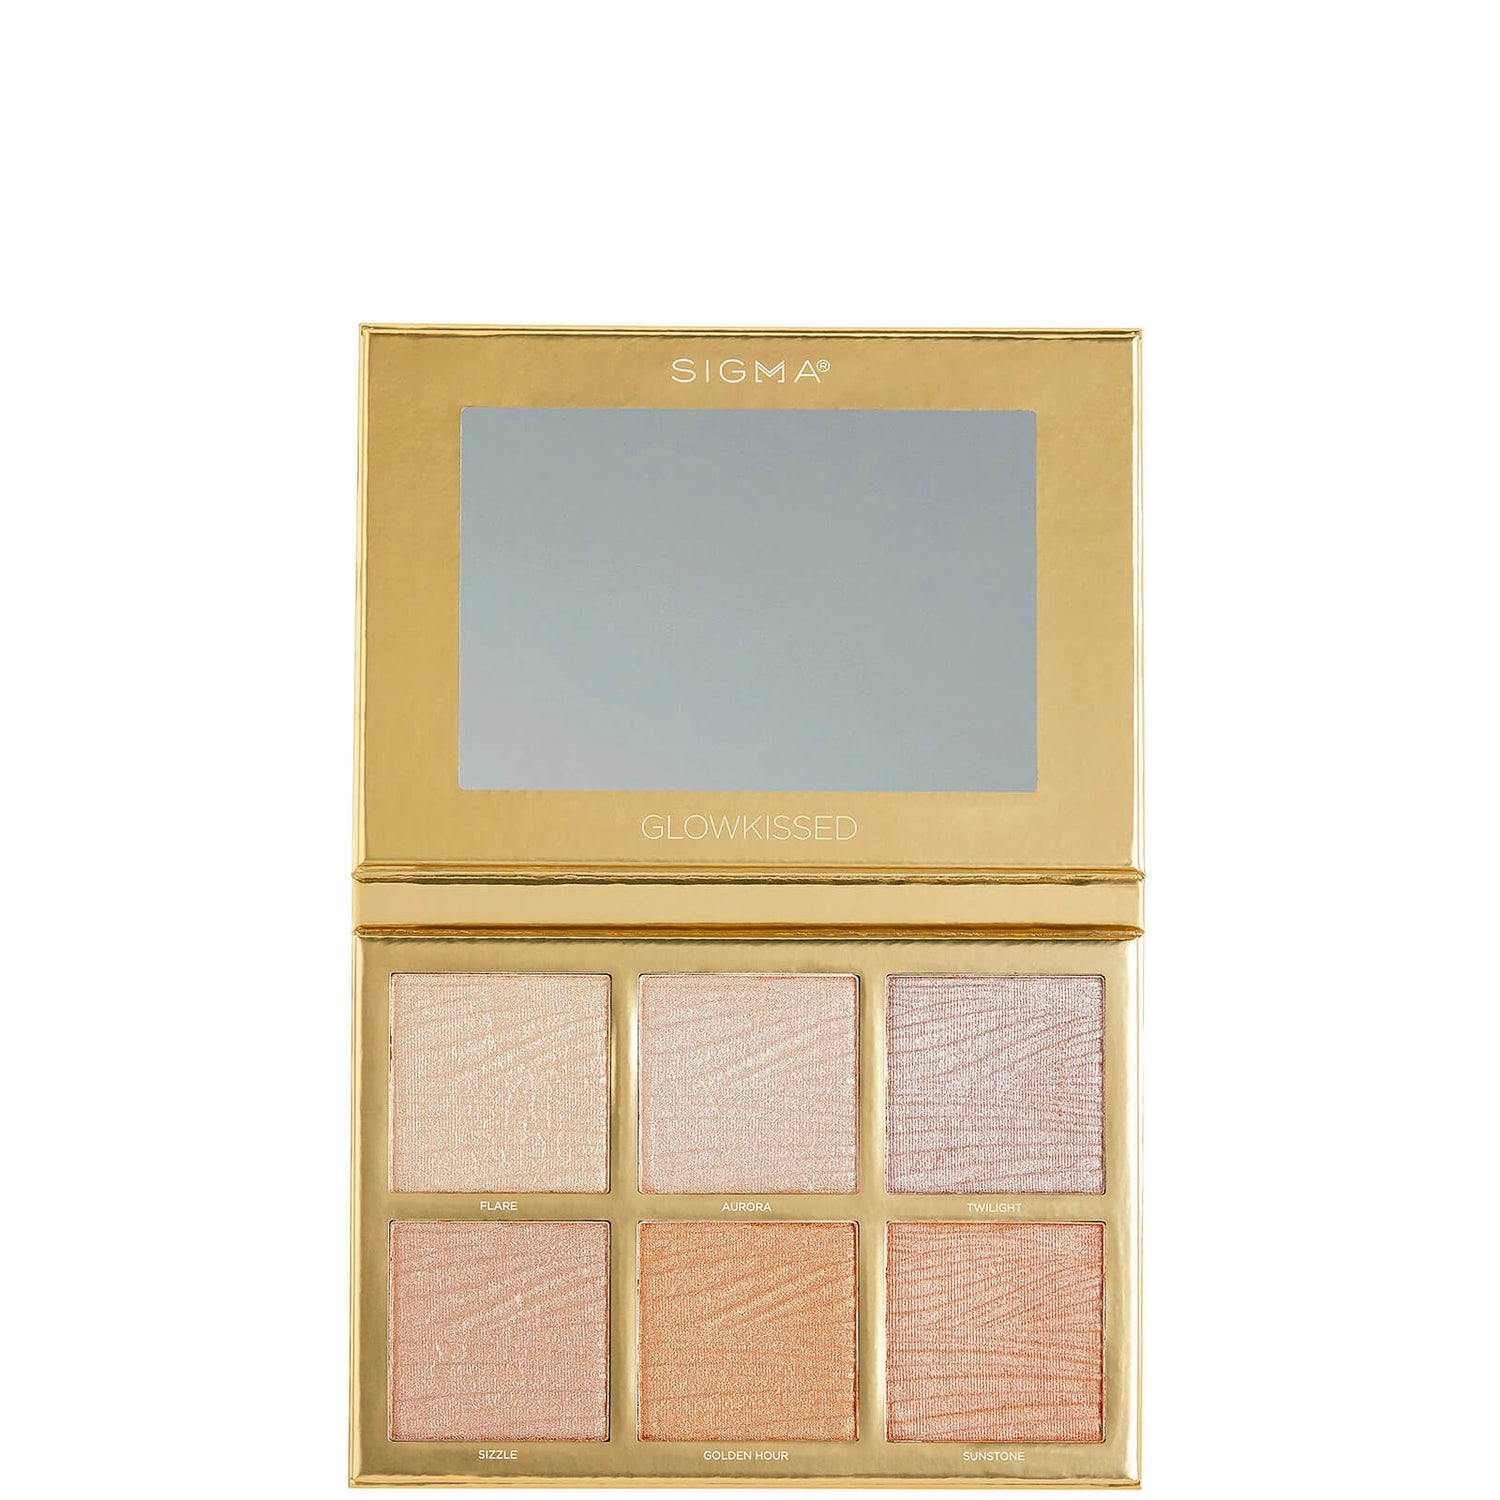 Sigma Glow Kissed Highlighter Palette 28.2g